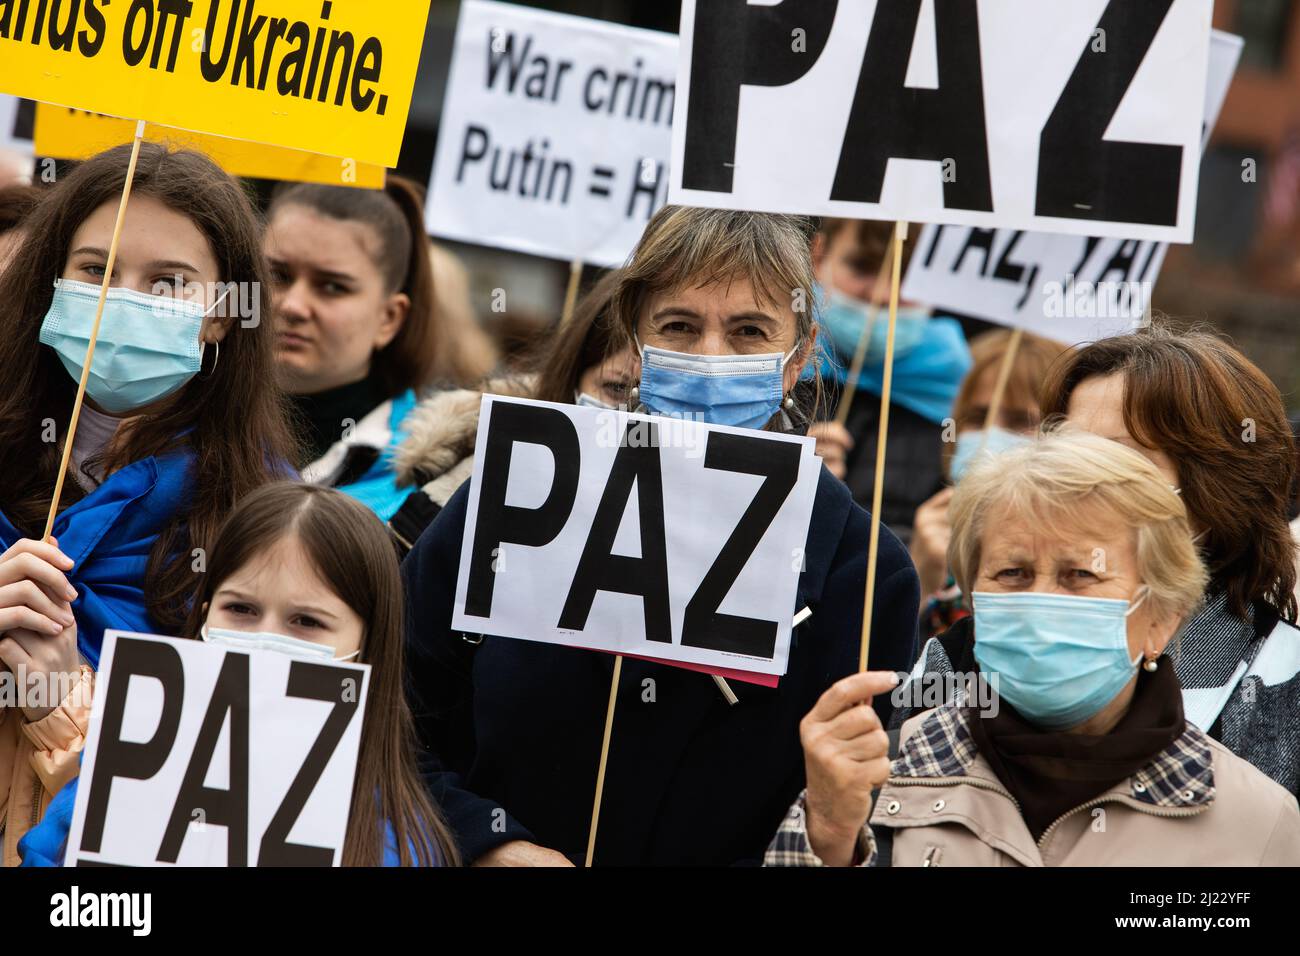 People hold a sign that reads 'Peace' during a protest against the war in Ukraine in Madrid, Spain Stock Photo